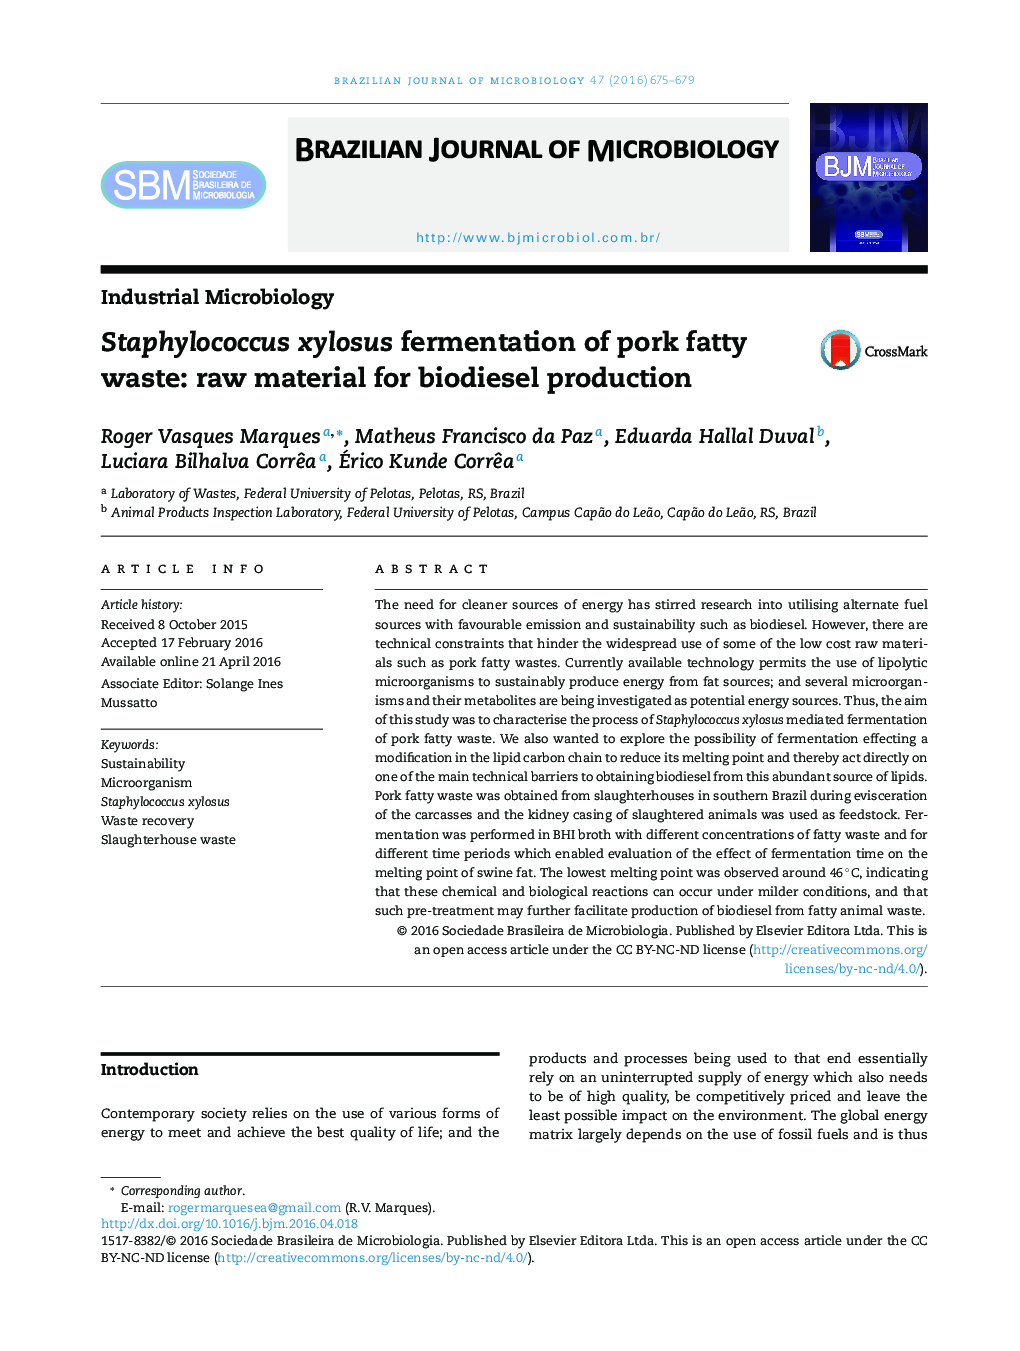 Staphylococcus xylosus fermentation of pork fatty waste: raw material for biodiesel production